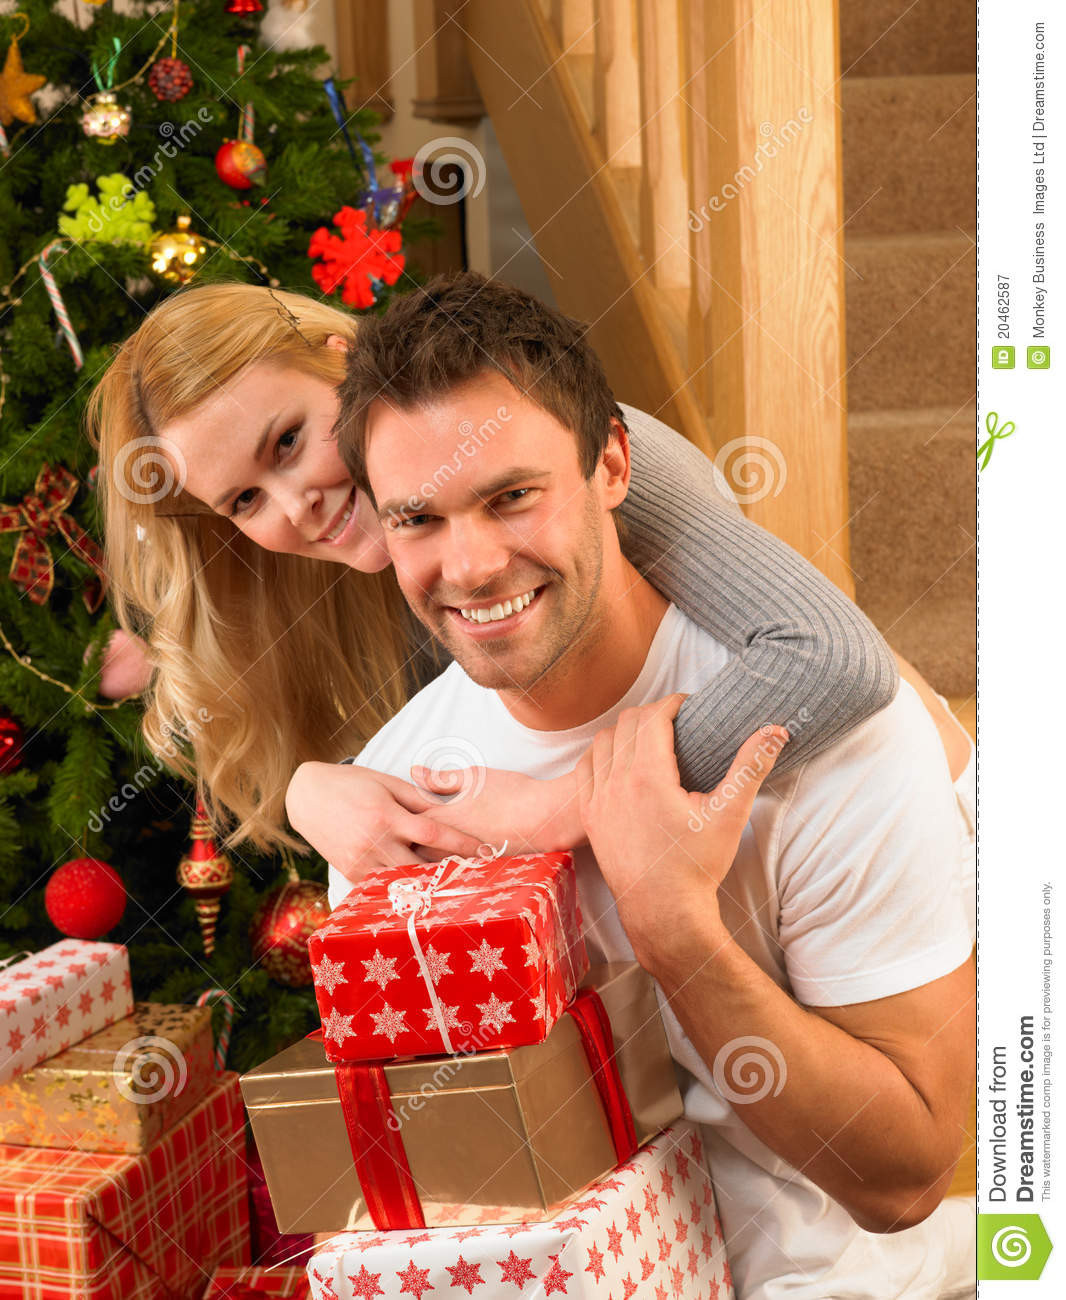 Christmas Gift Ideas For Young Couples
 Young Couple At Christmas Exchanging Gifts Royalty Free